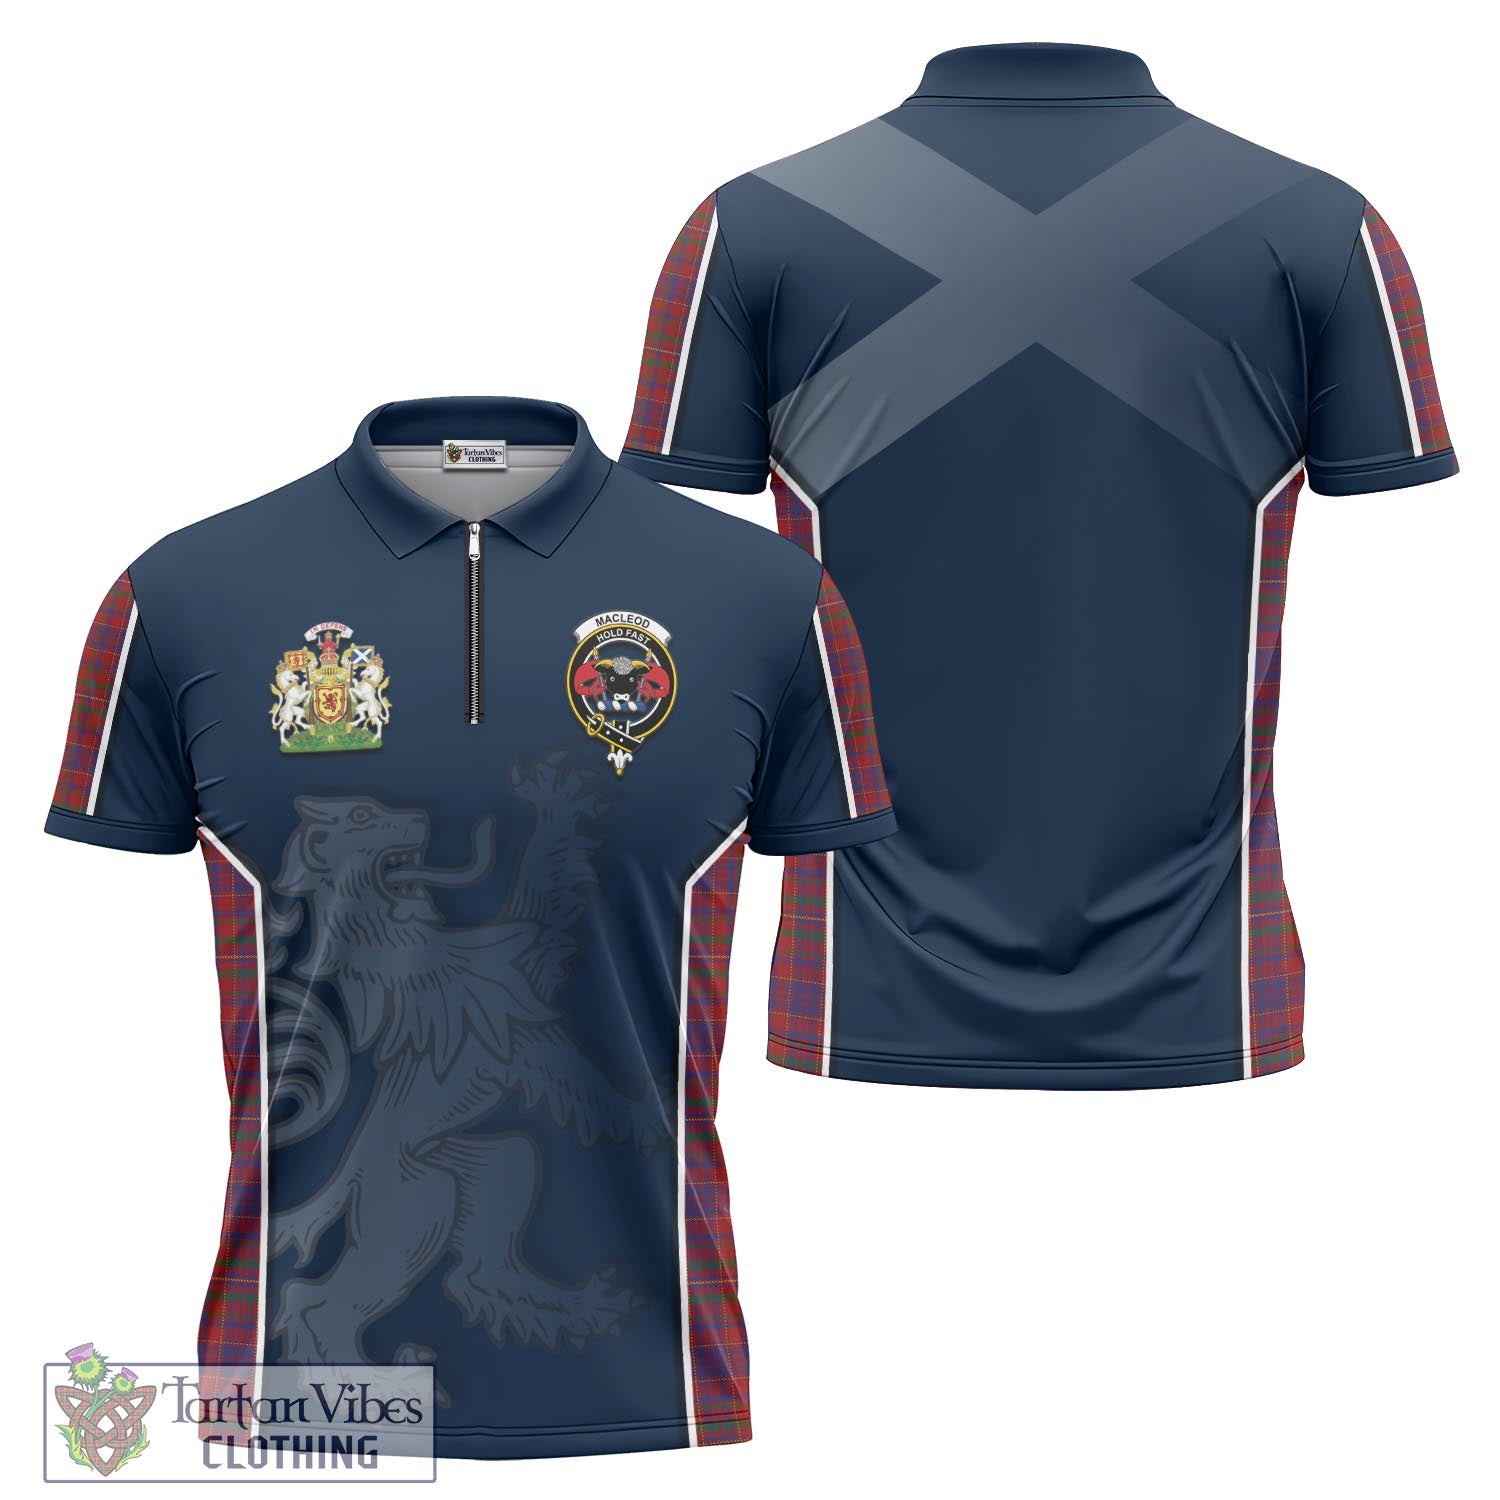 Tartan Vibes Clothing MacLeod Red Tartan Zipper Polo Shirt with Family Crest and Lion Rampant Vibes Sport Style